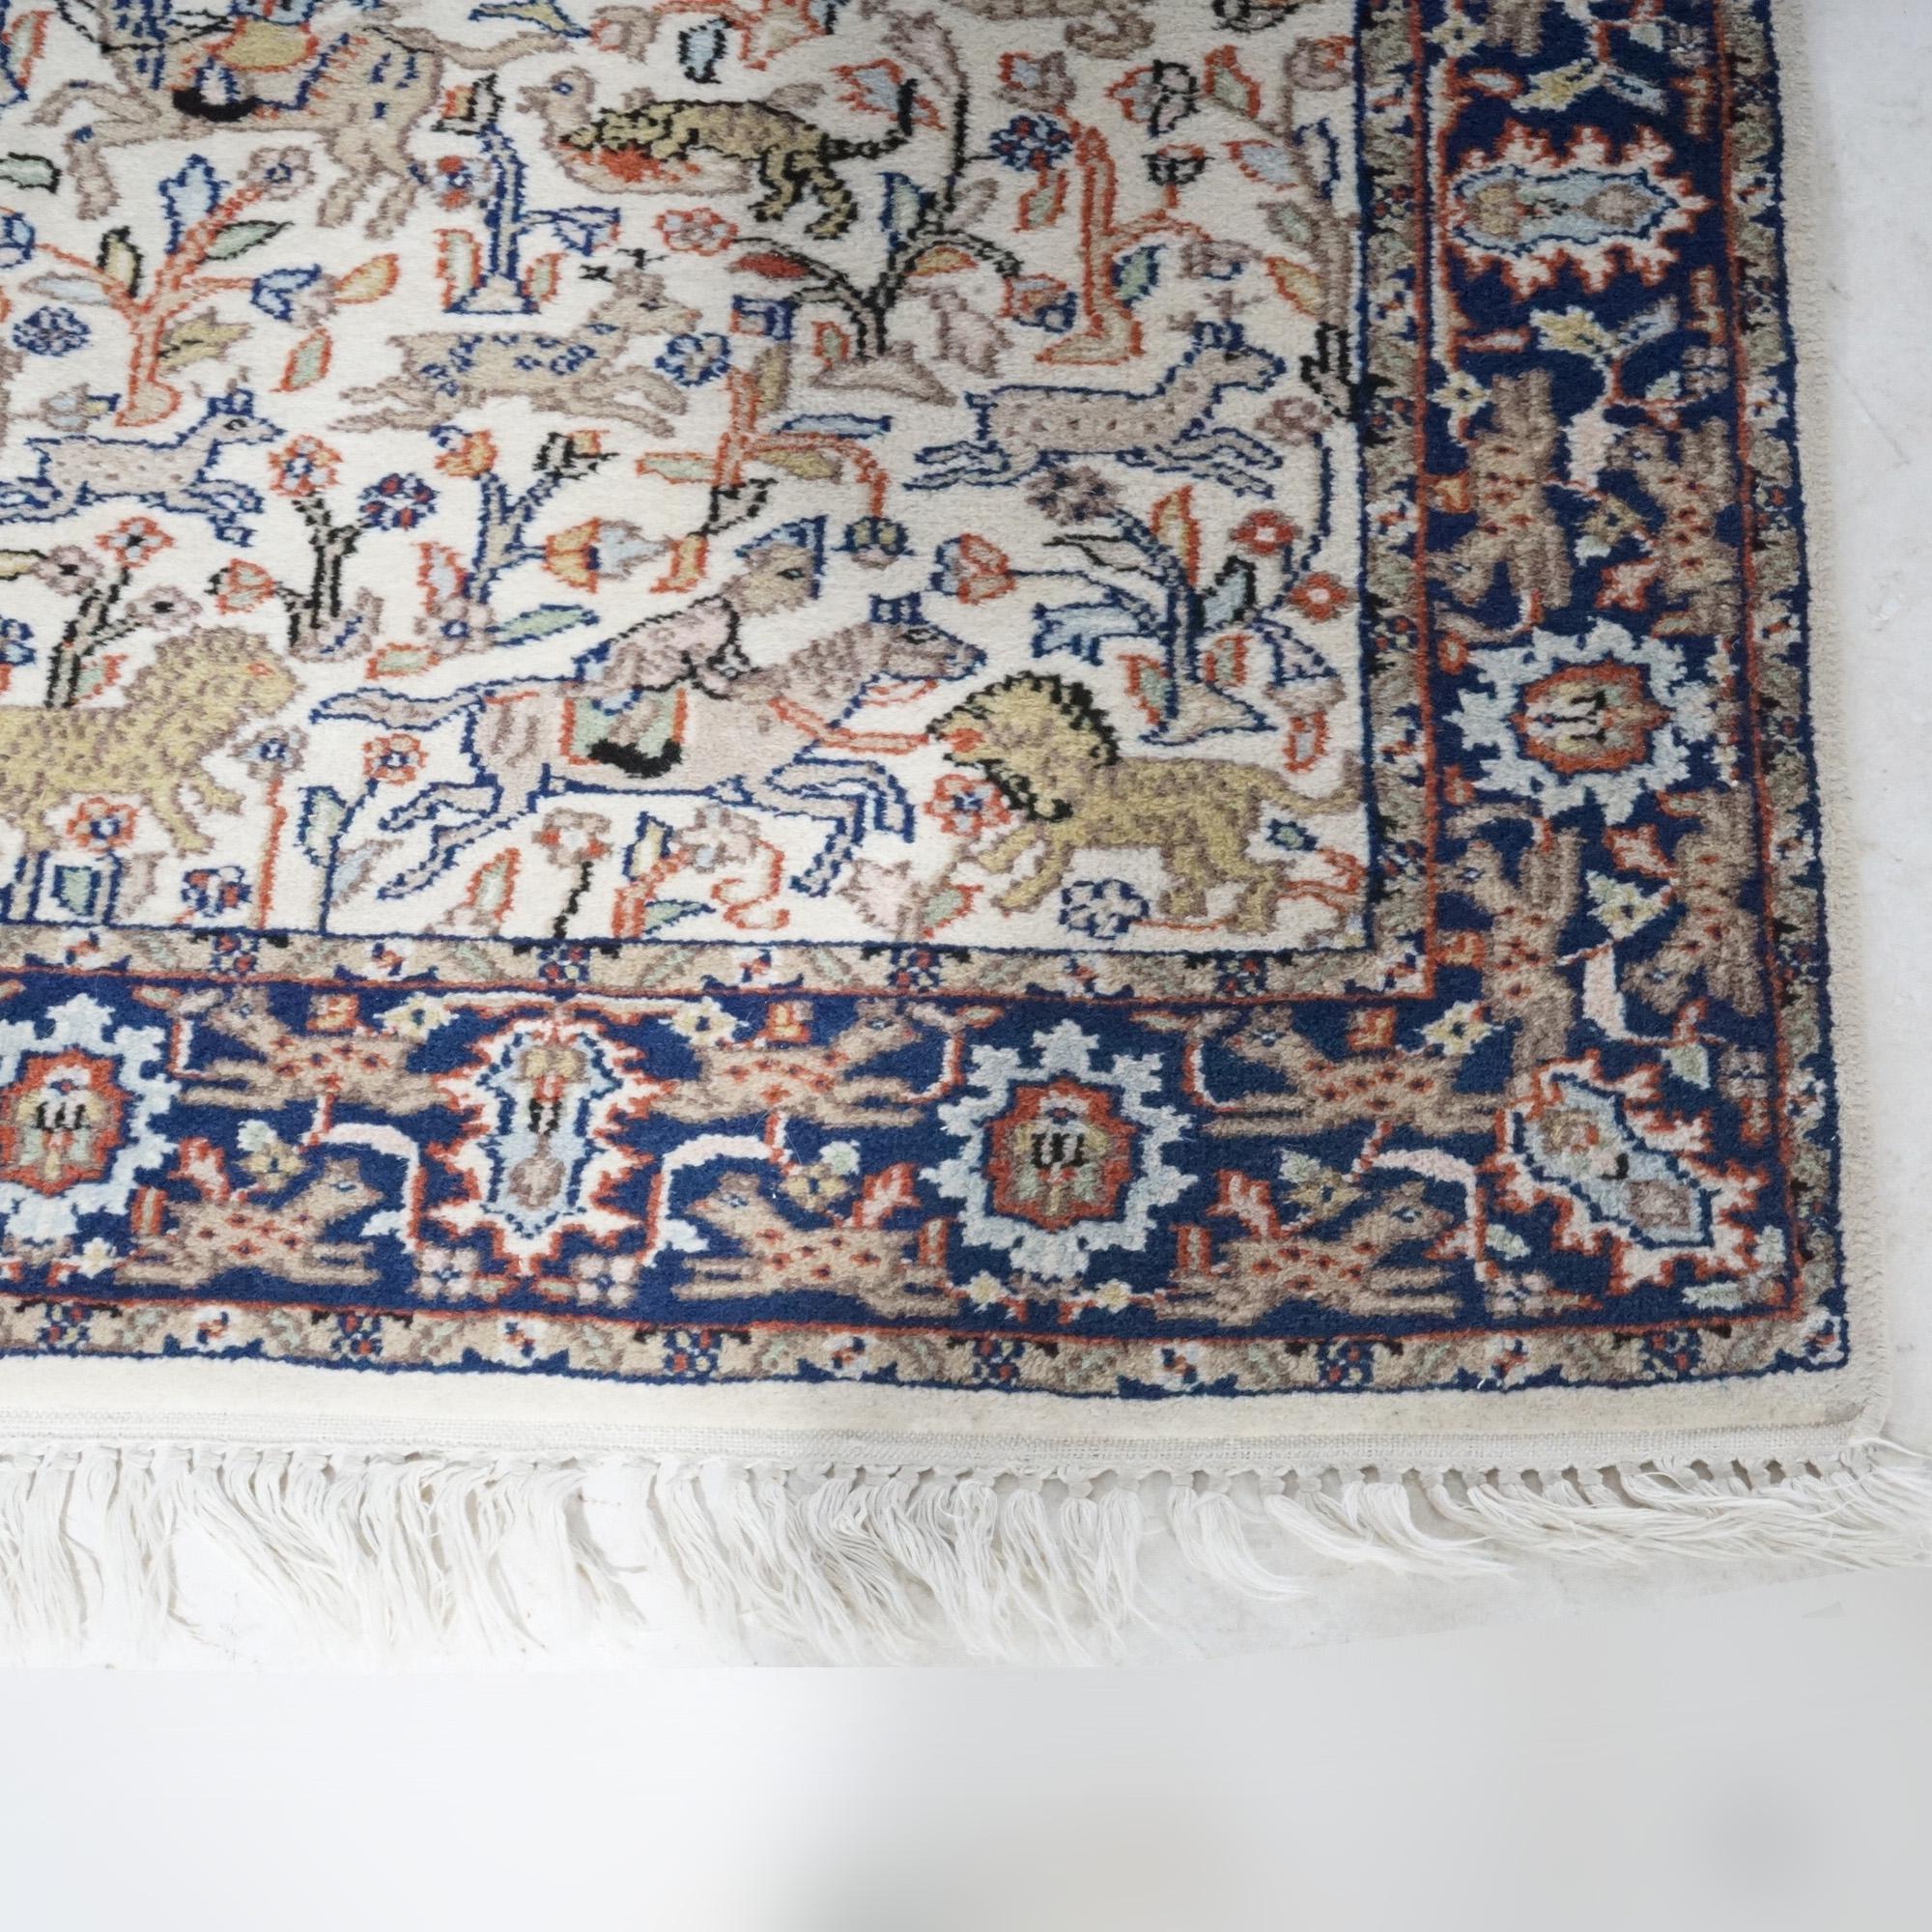 Tabriz Oriental Wool Hunt Rug with Figures & Animals, 20th Century For Sale 8